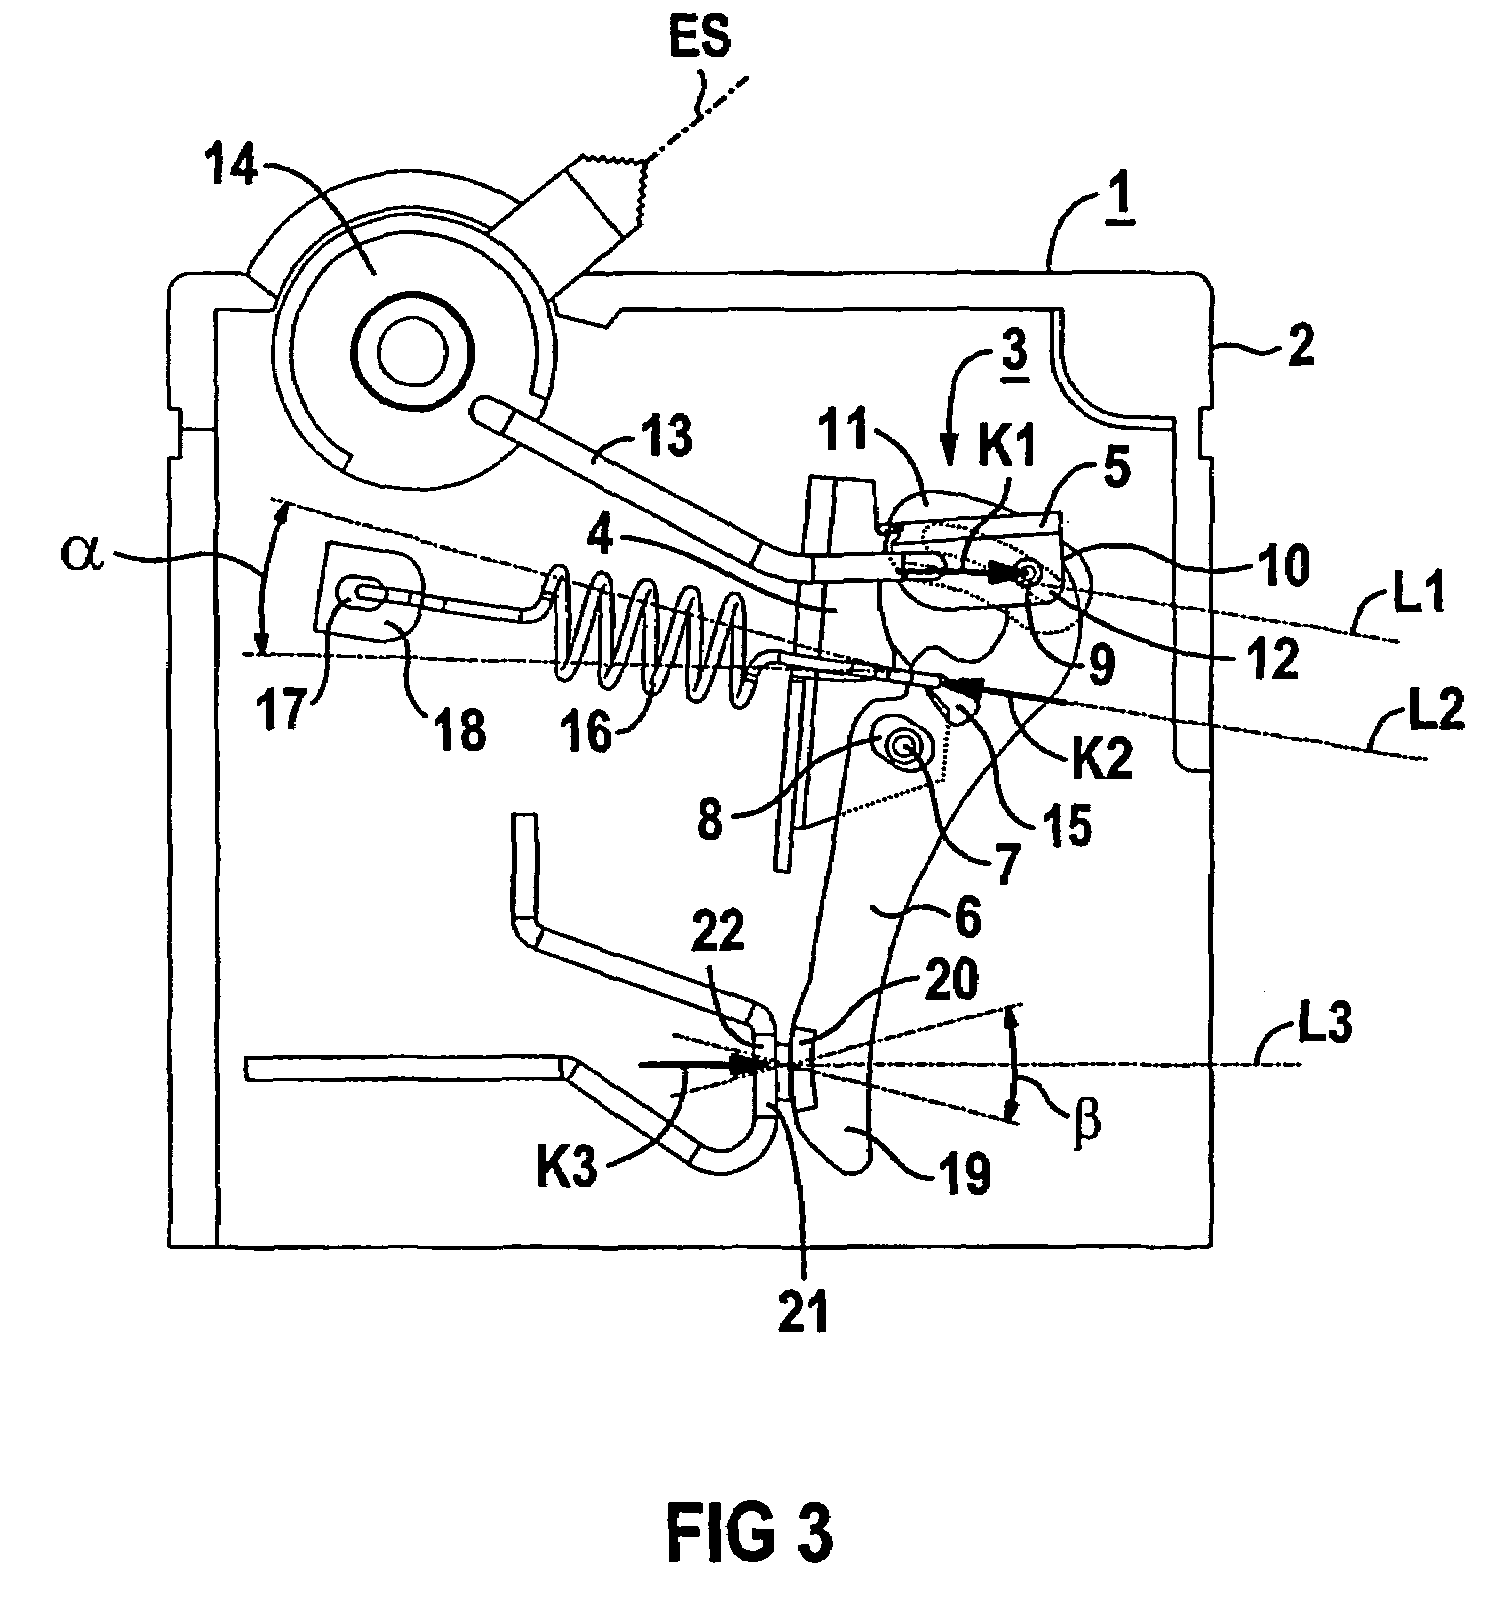 Switching device comprising a breaker mechanism